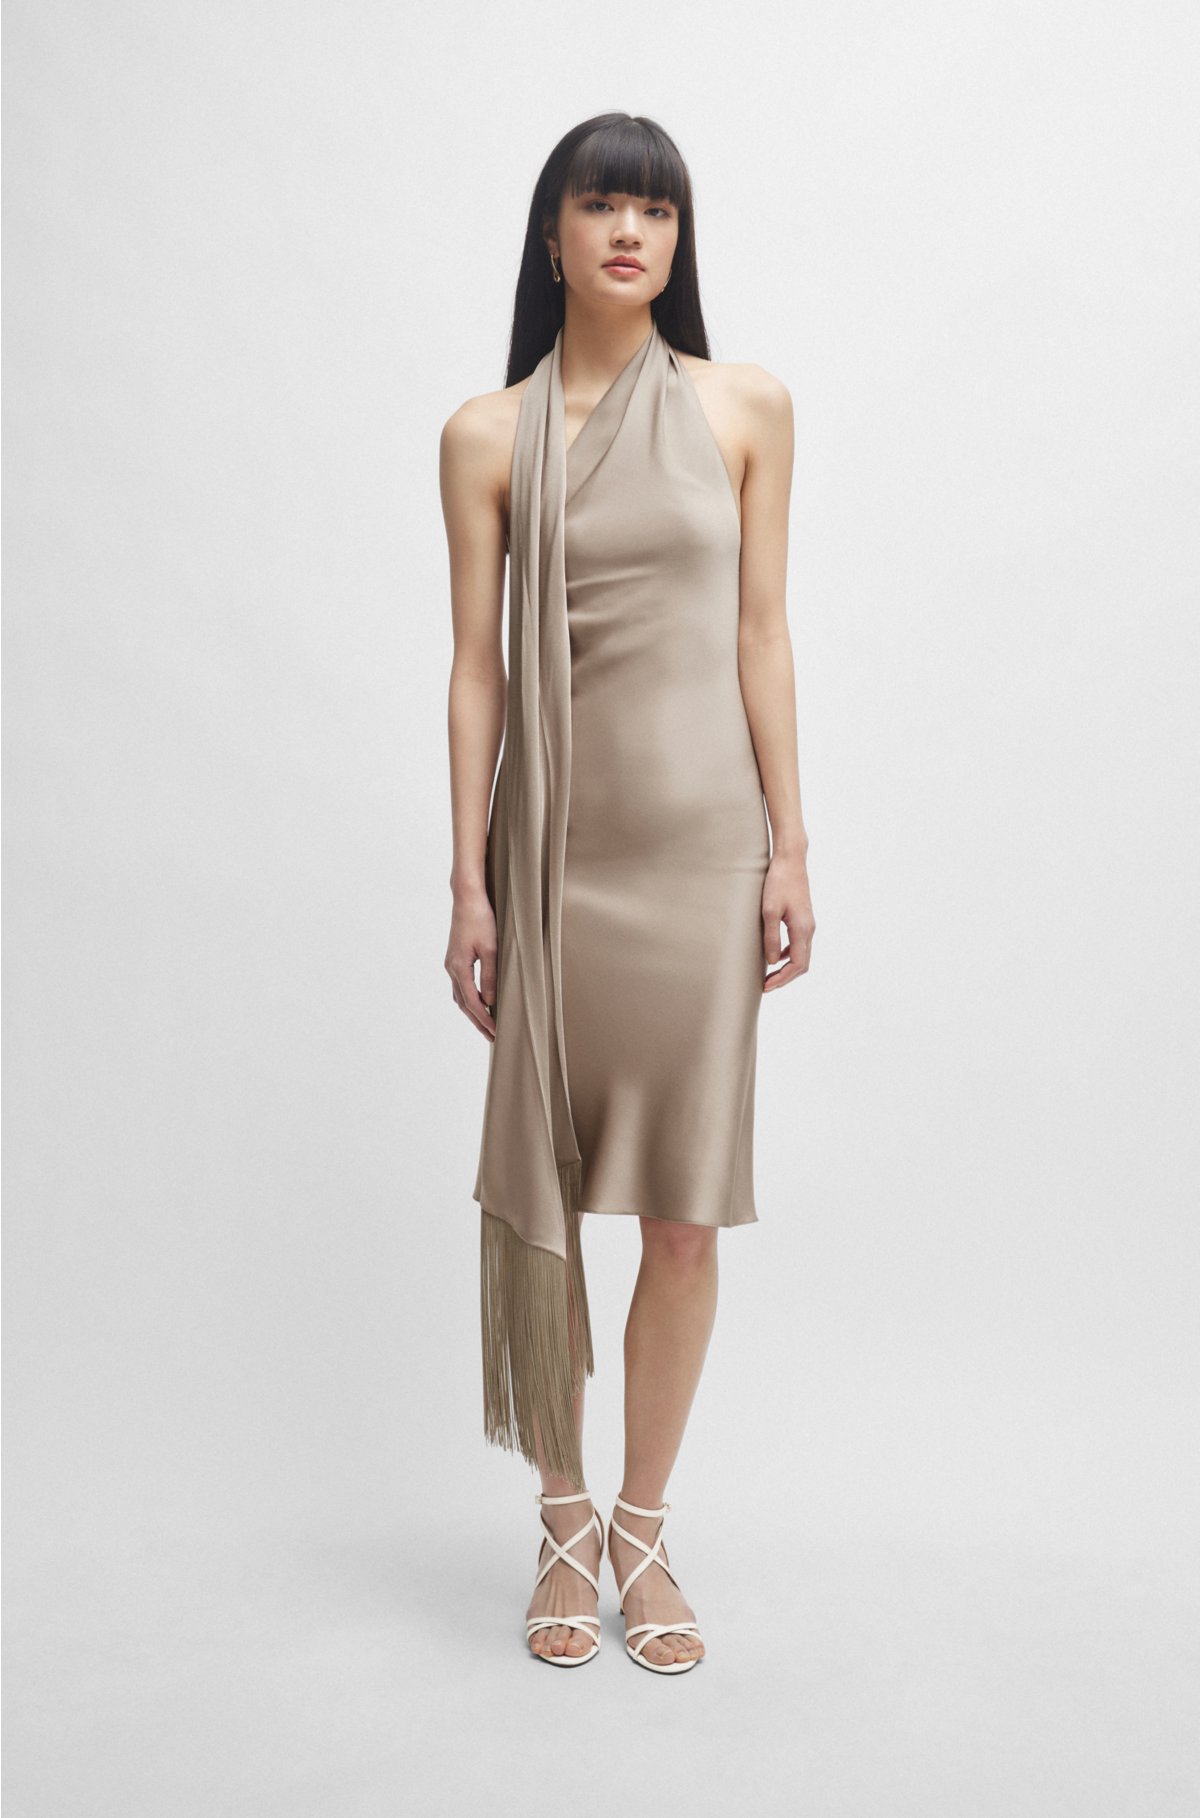 One-shoulder dress with fringed scarf detail, Gold